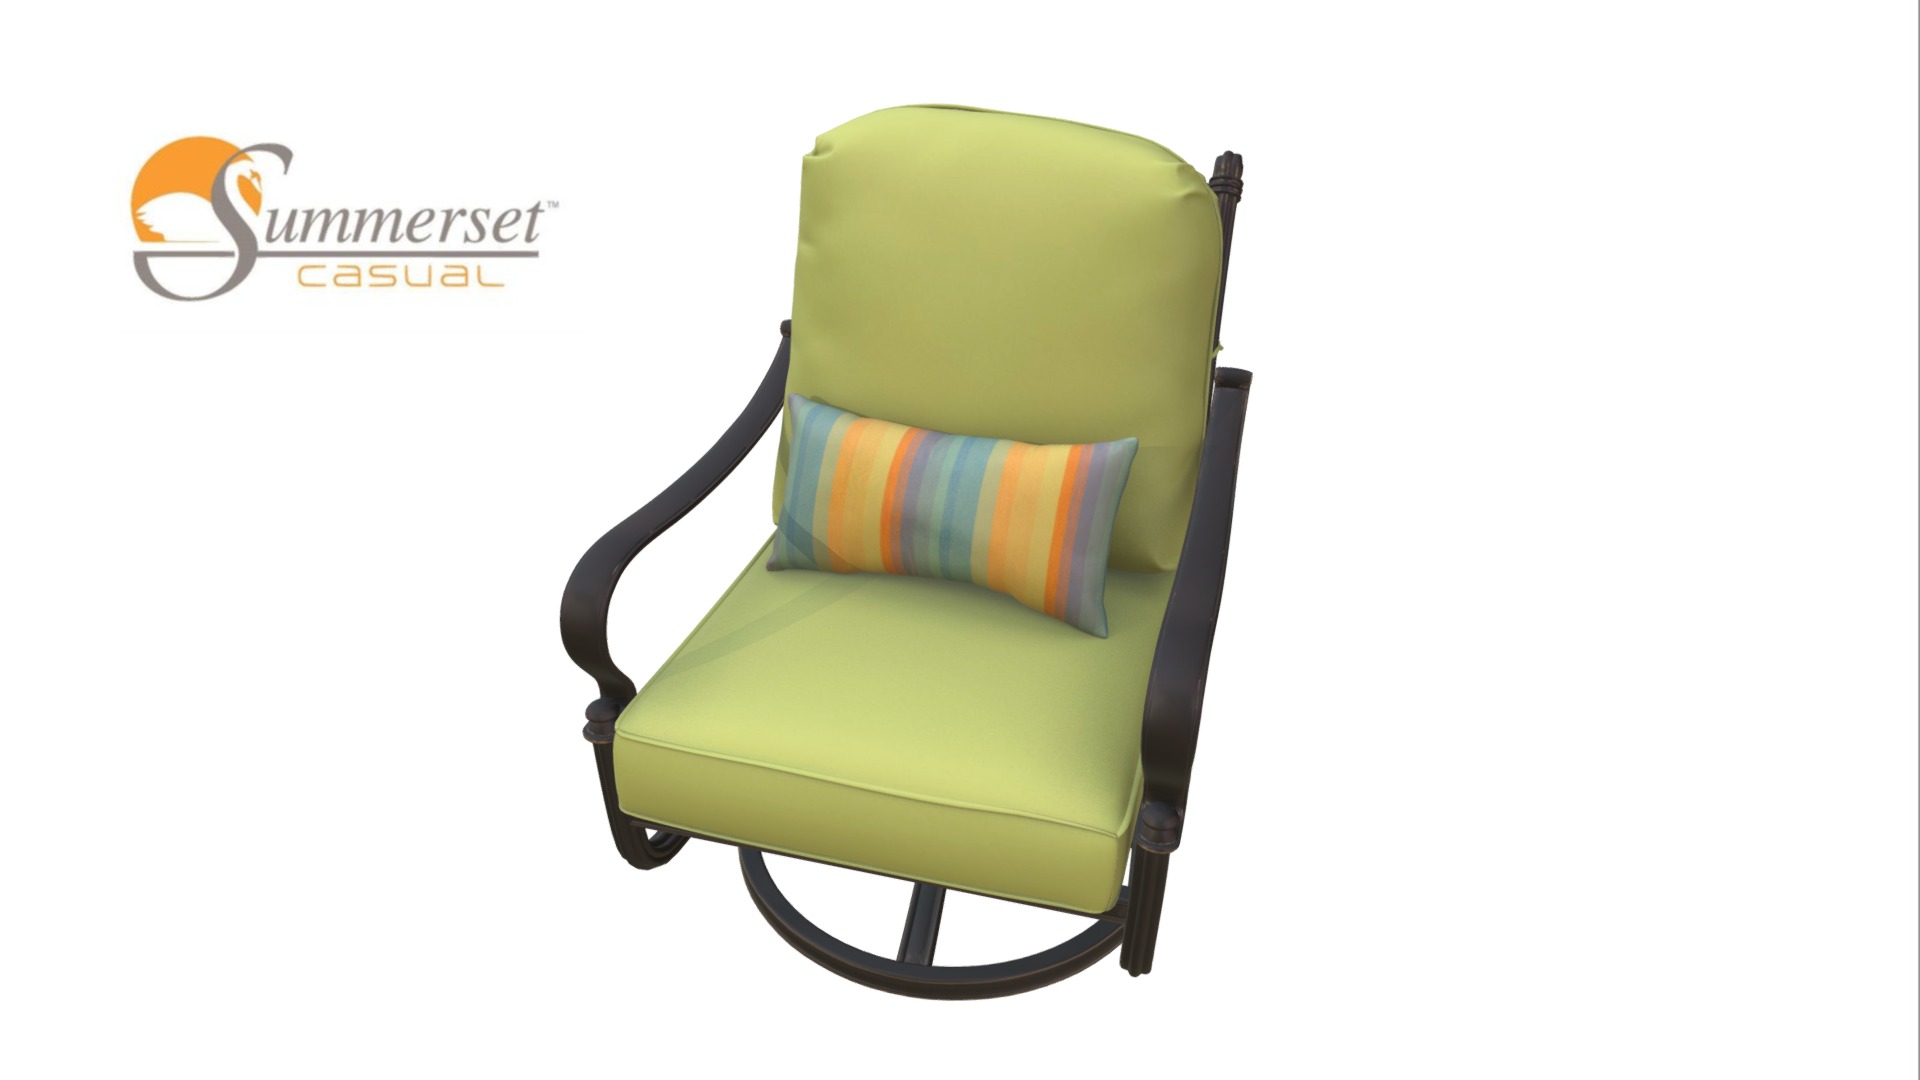 3D model Swivel Club Chair - This is a 3D model of the Swivel Club Chair. The 3D model is about a green and yellow chair.